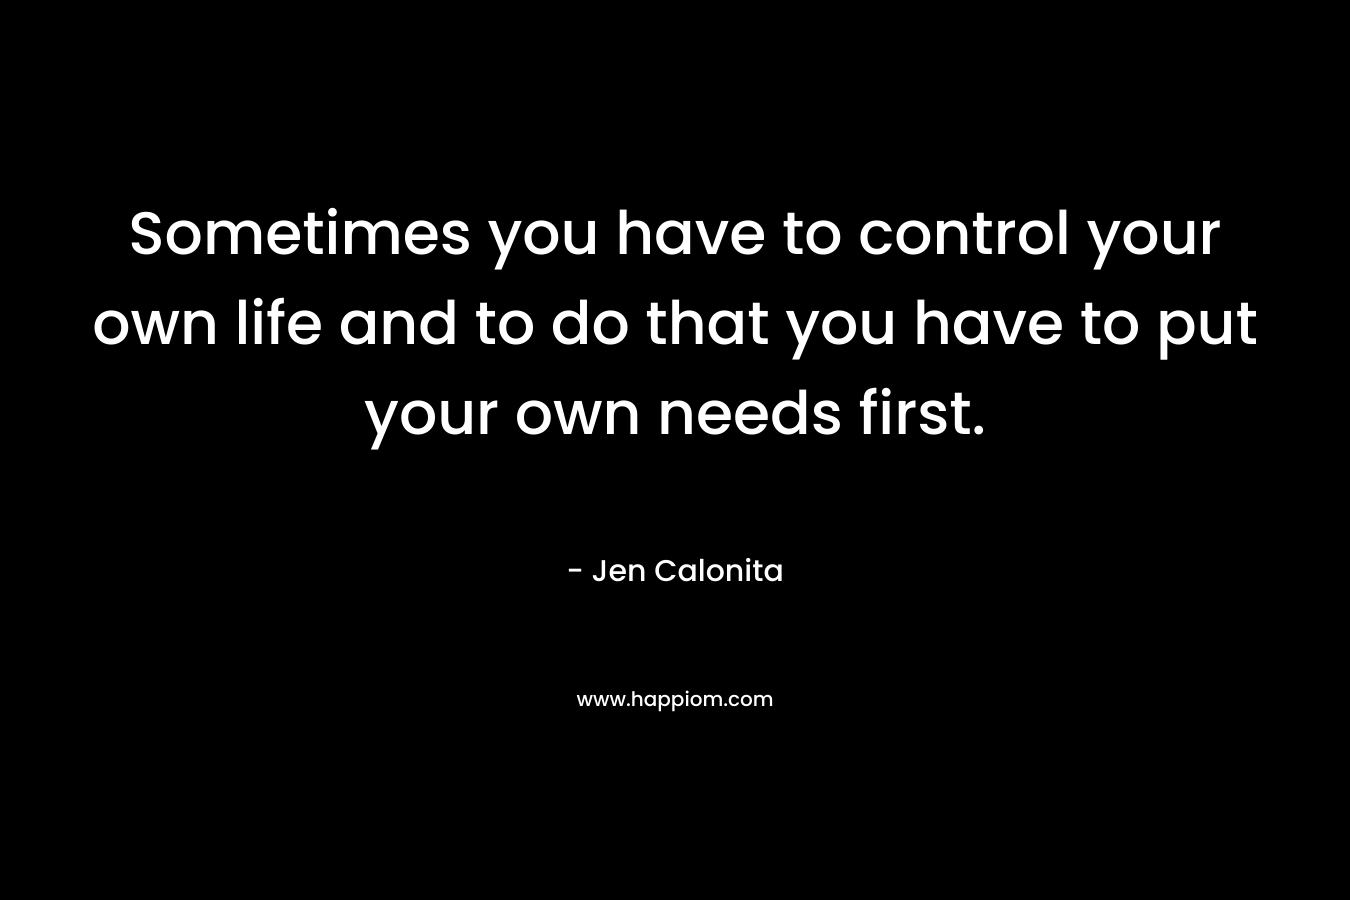 Sometimes you have to control your own life and to do that you have to put your own needs first. – Jen Calonita